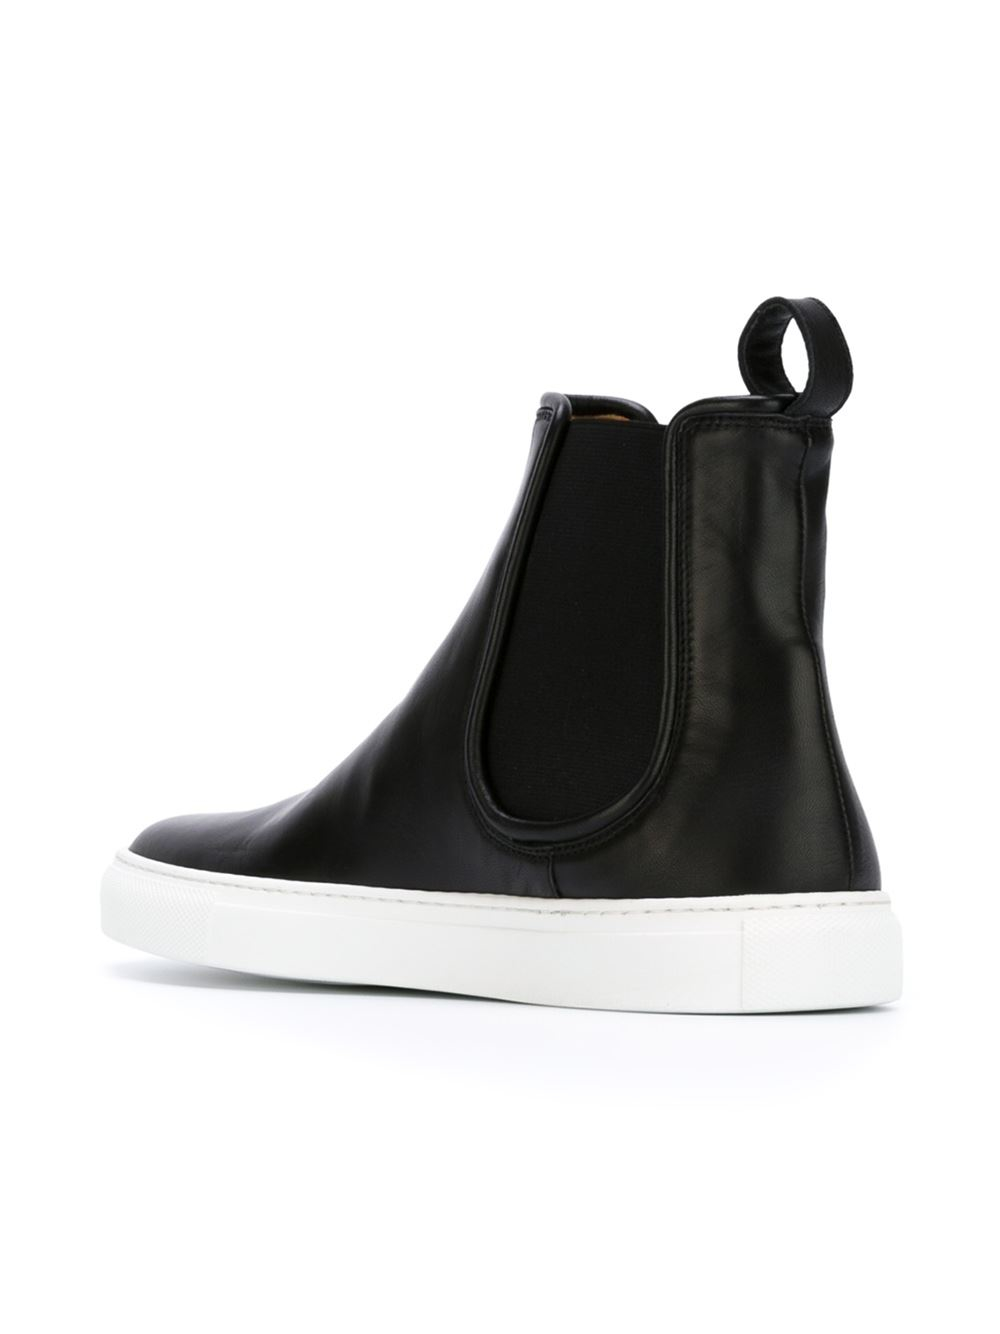 P.a.r.o.s.h. Rubber-Sole Leather Chelsea Boots in Black | Lyst